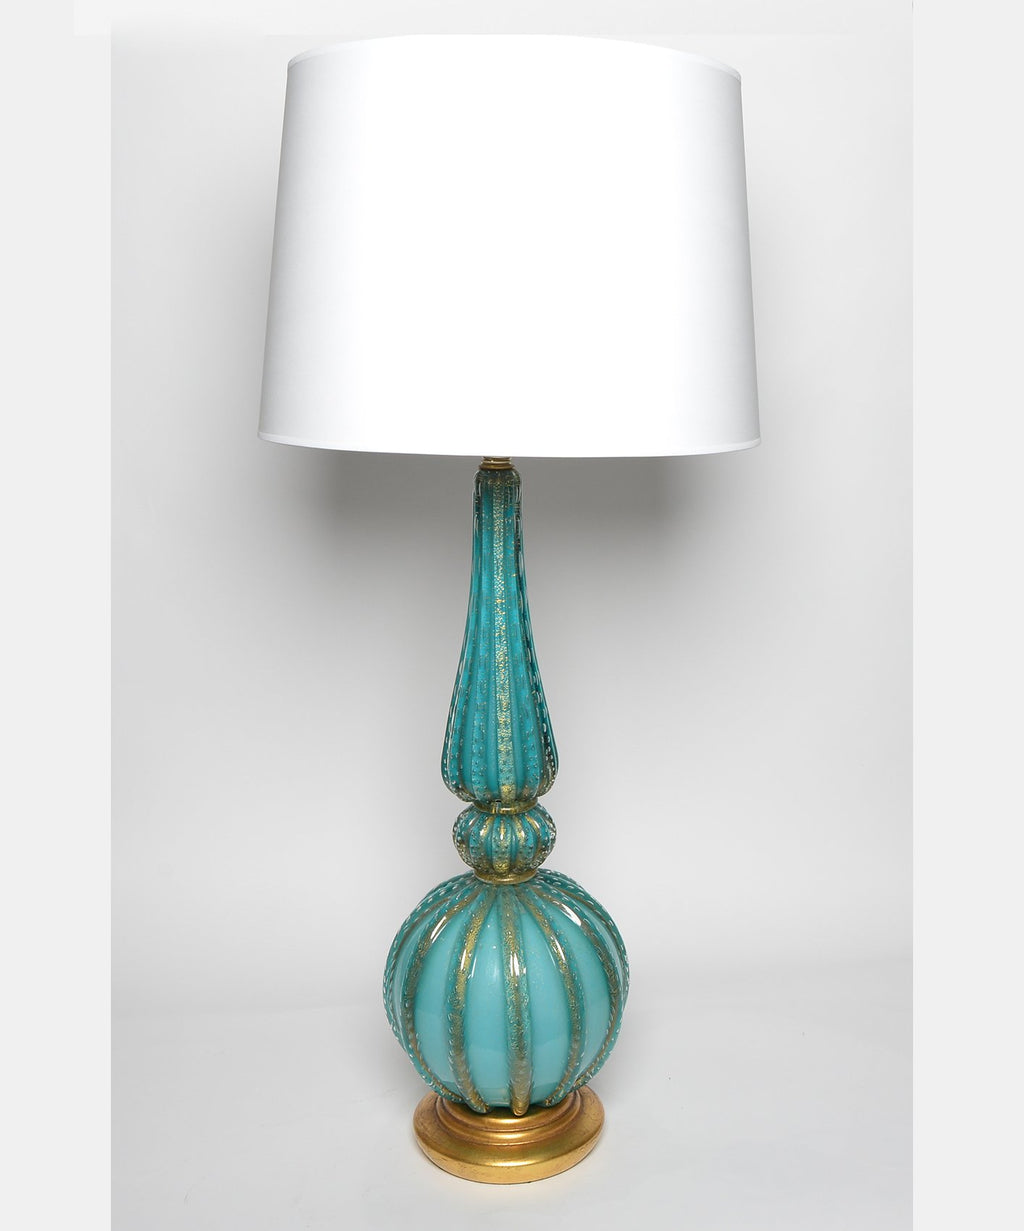 Teal and Gold Murano Glass Table Lamp